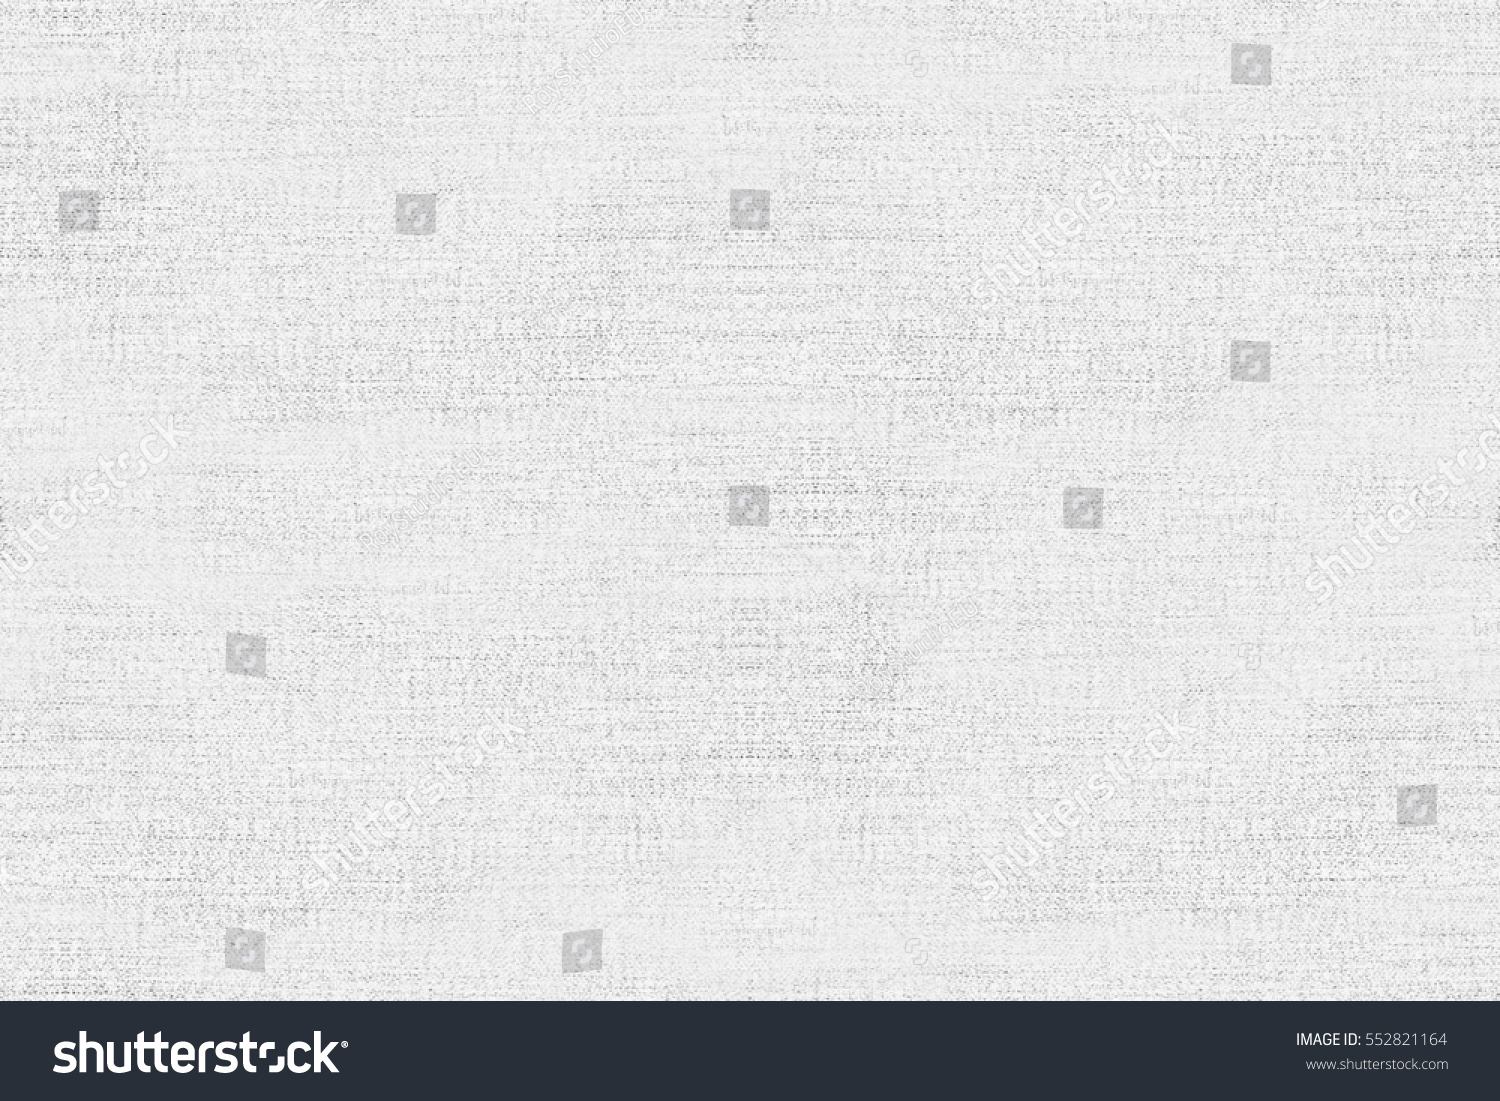 old paper texture or background dots seamless pattern #552821164